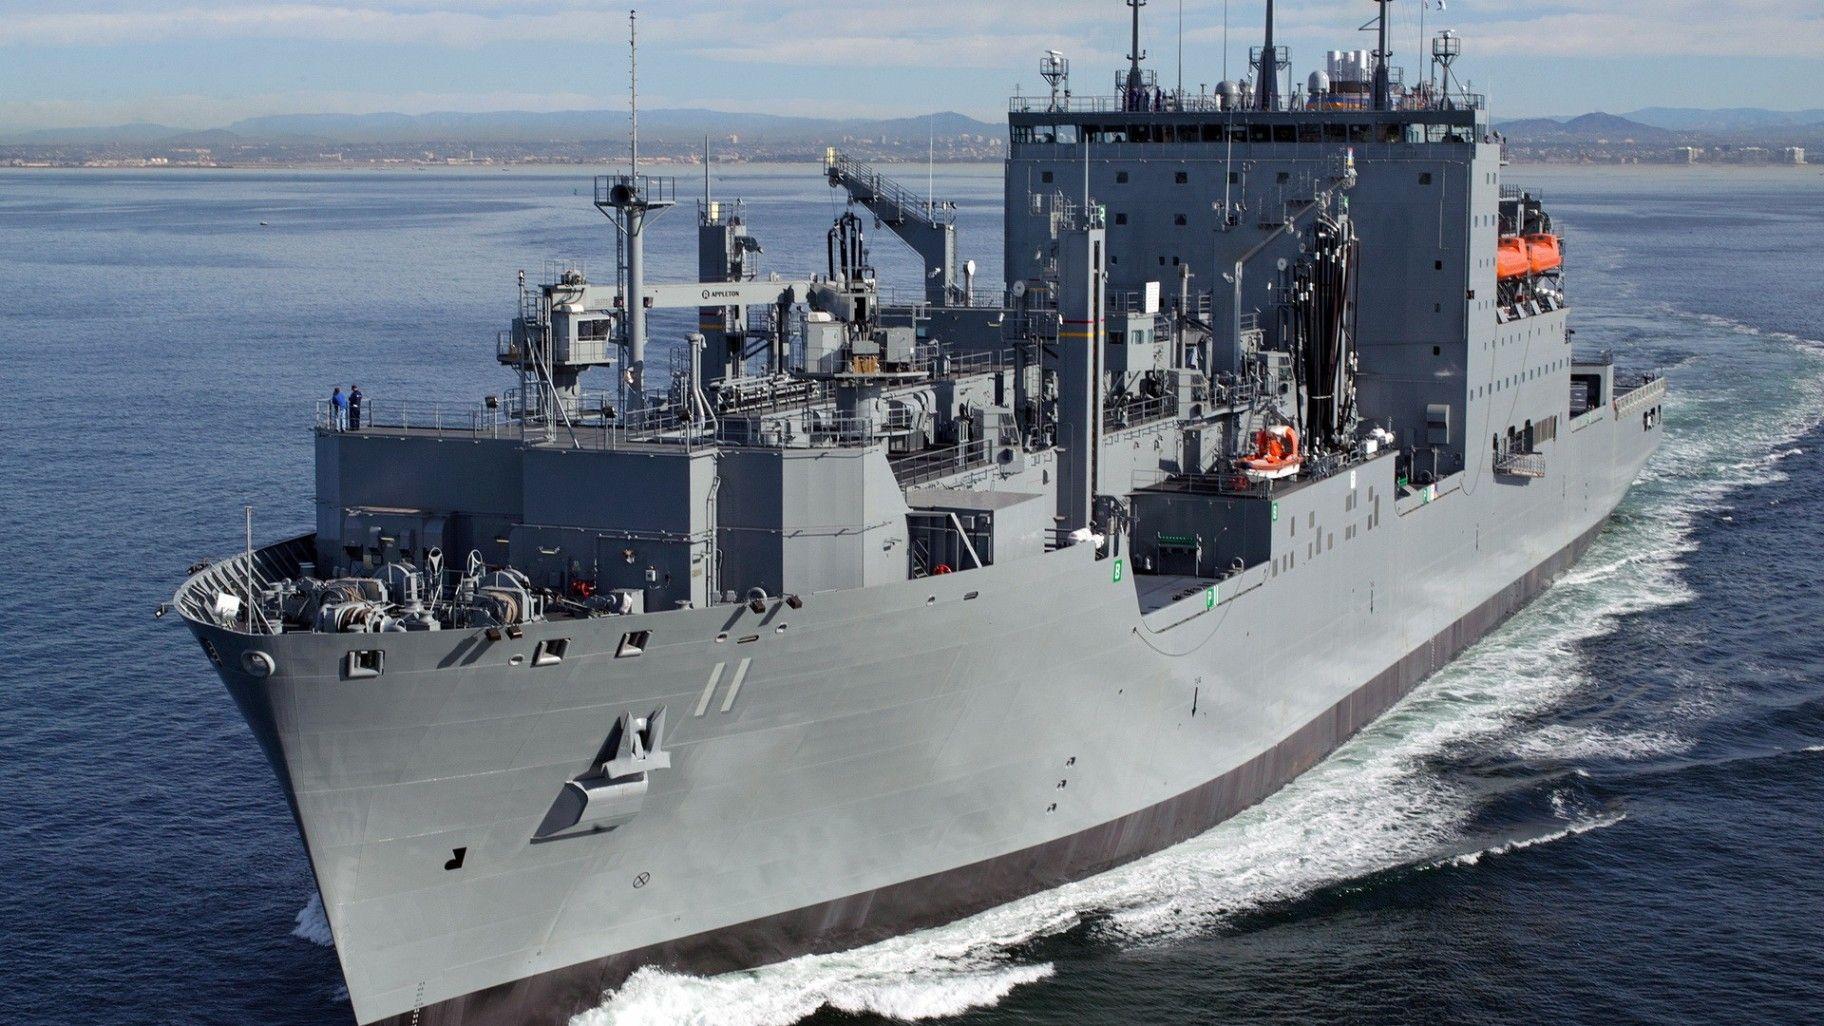 Indian army military navy ship real pics and photo download